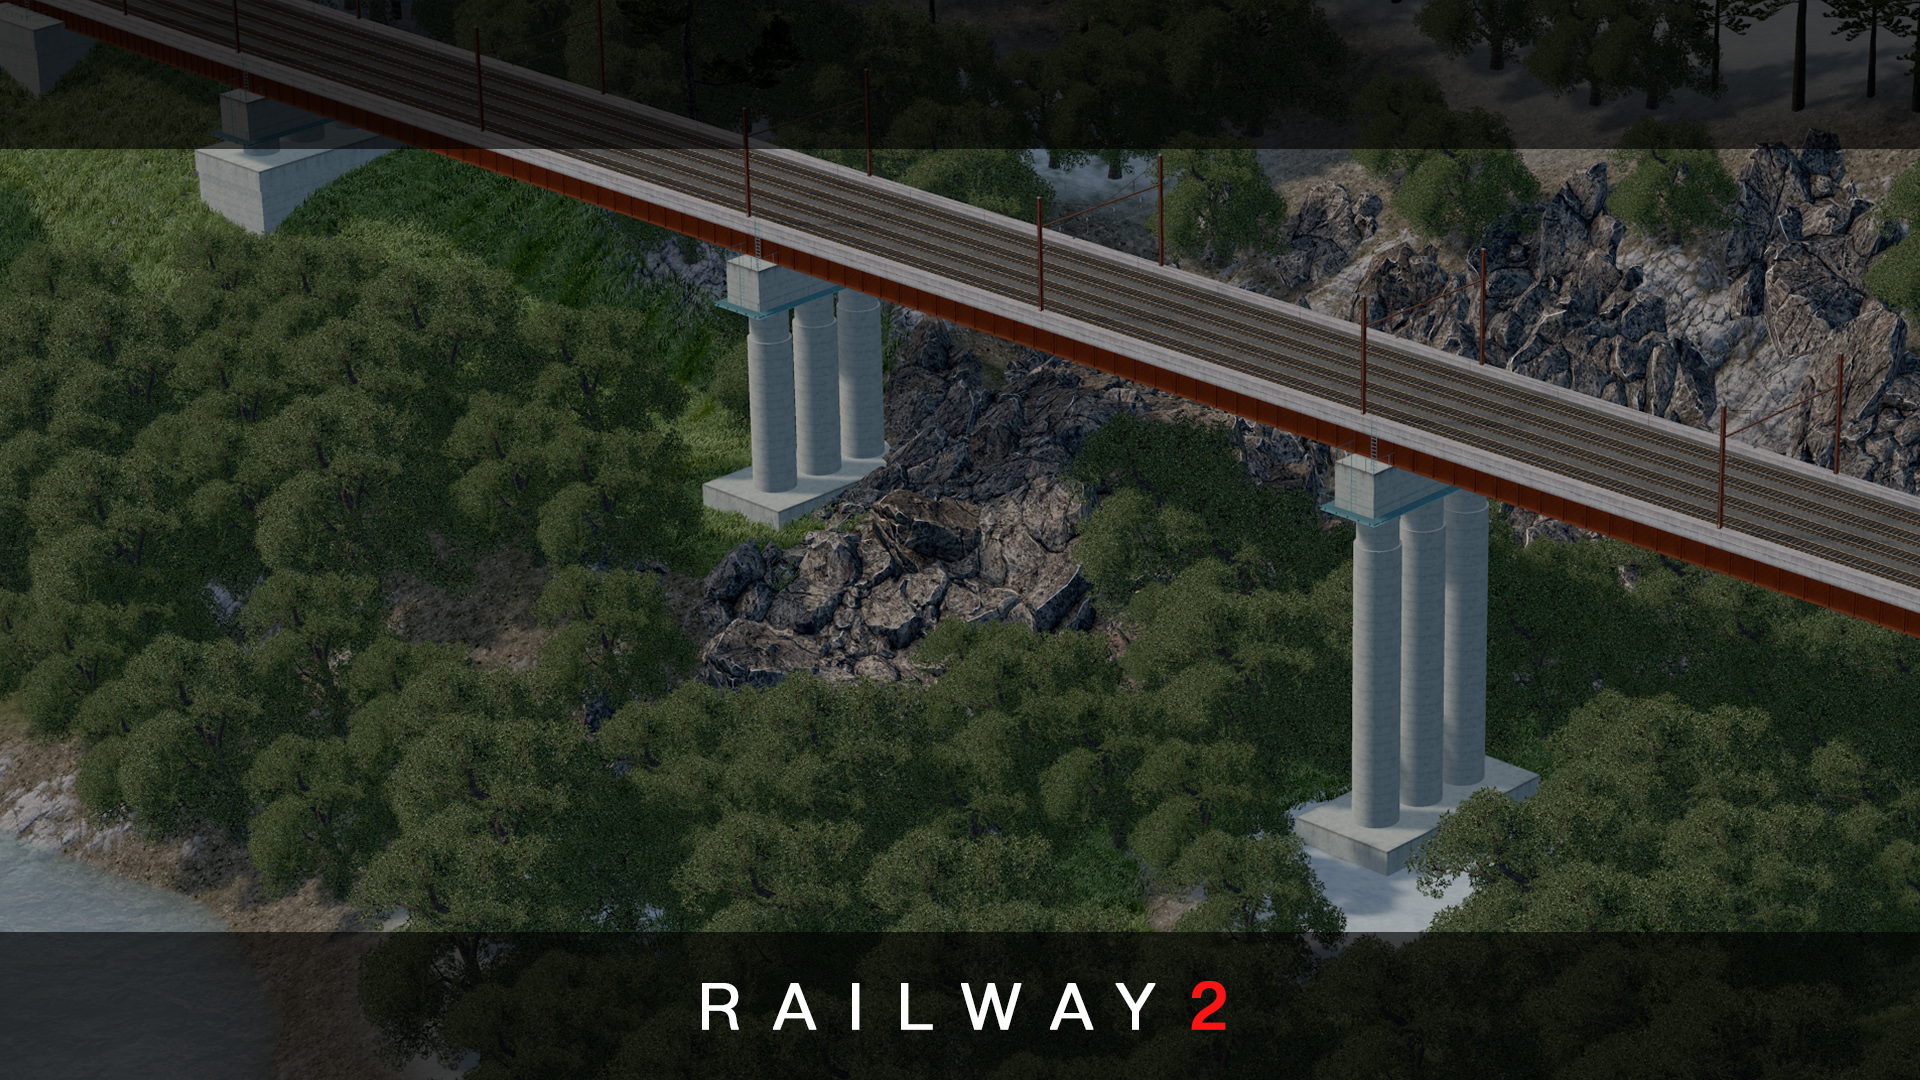 Cities: Skylines List of Railway 2 + Features + Modding Tutorial Information - 4.1 Networks: Core Features - B17E93A